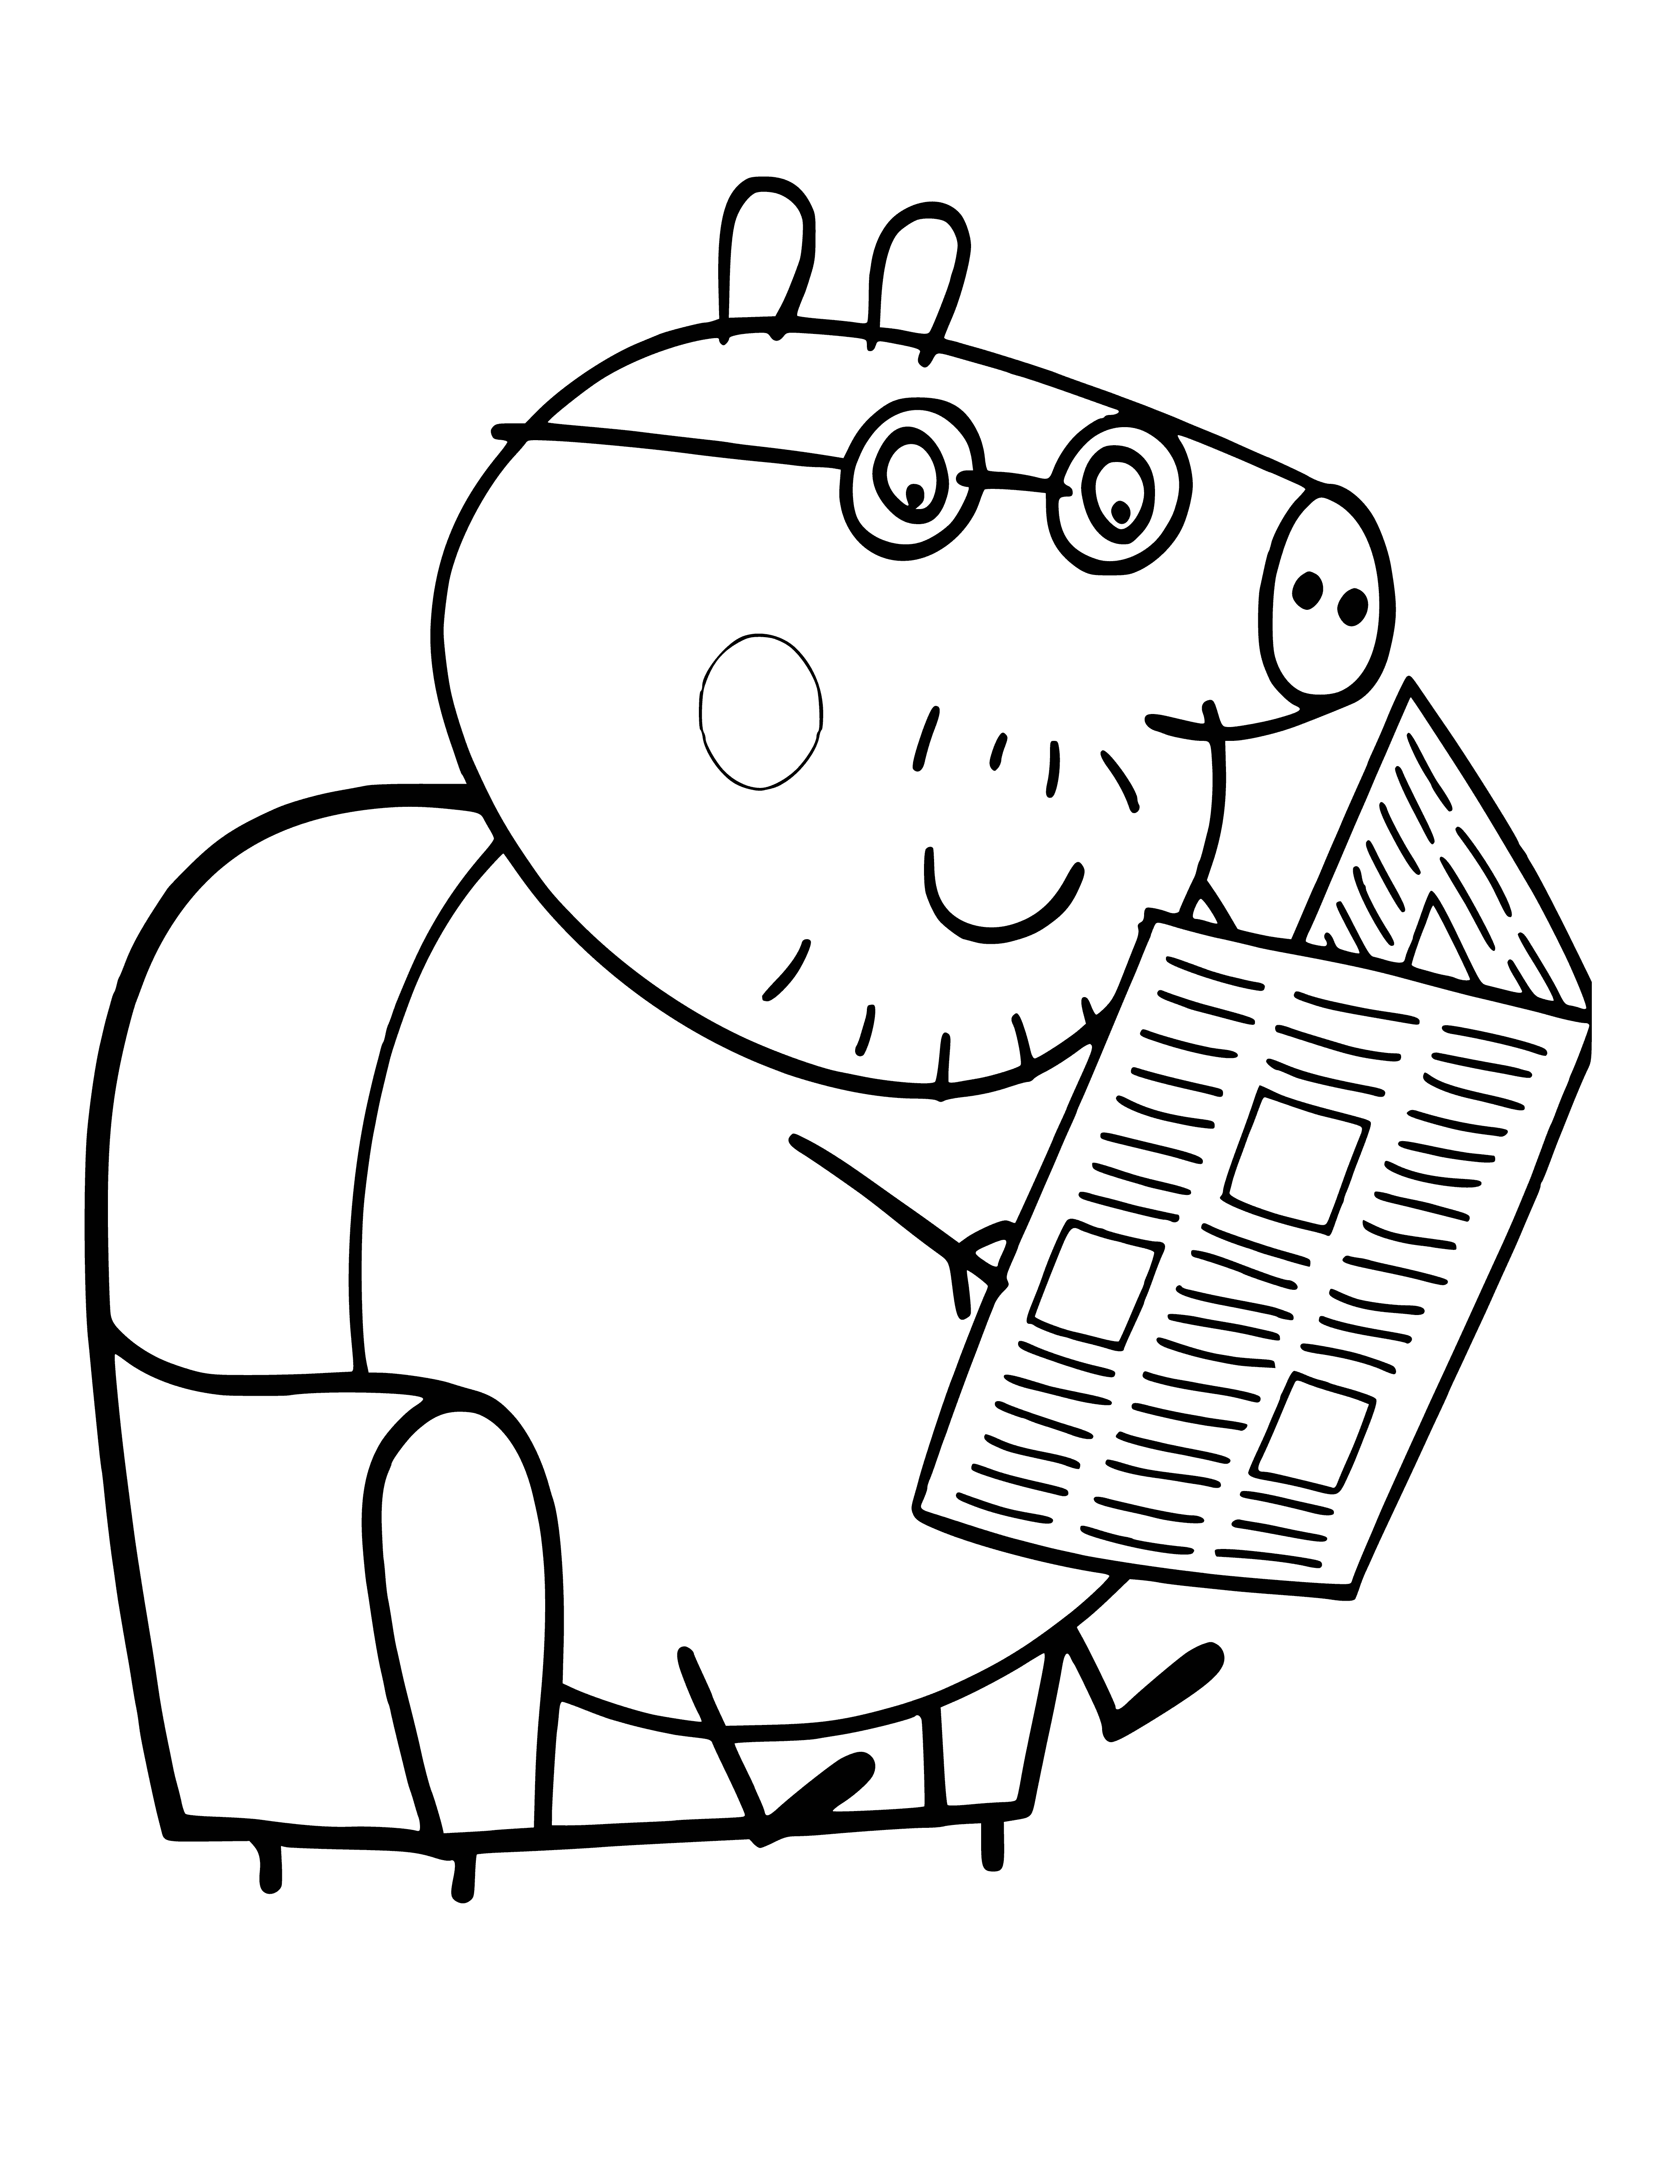 Daddy pig in the chair coloring page